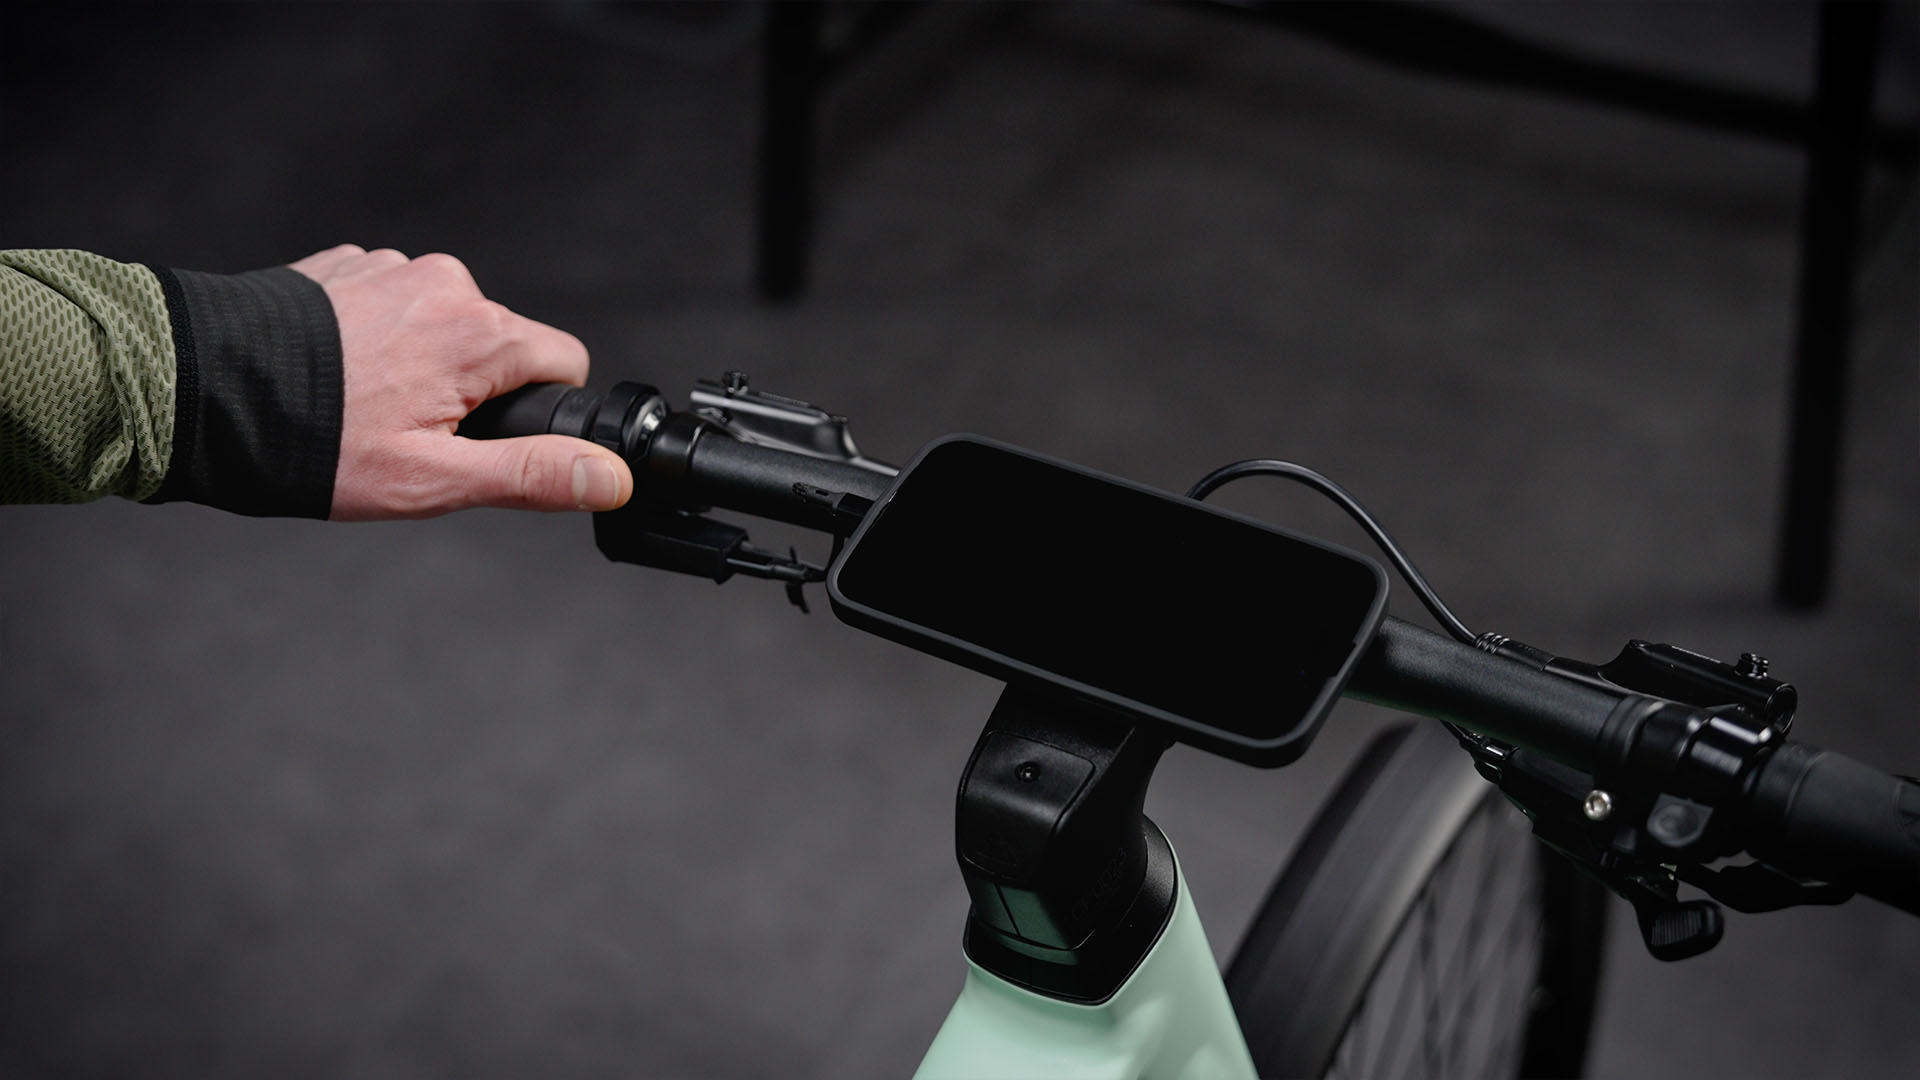 Install the Commuter:ON phone mount